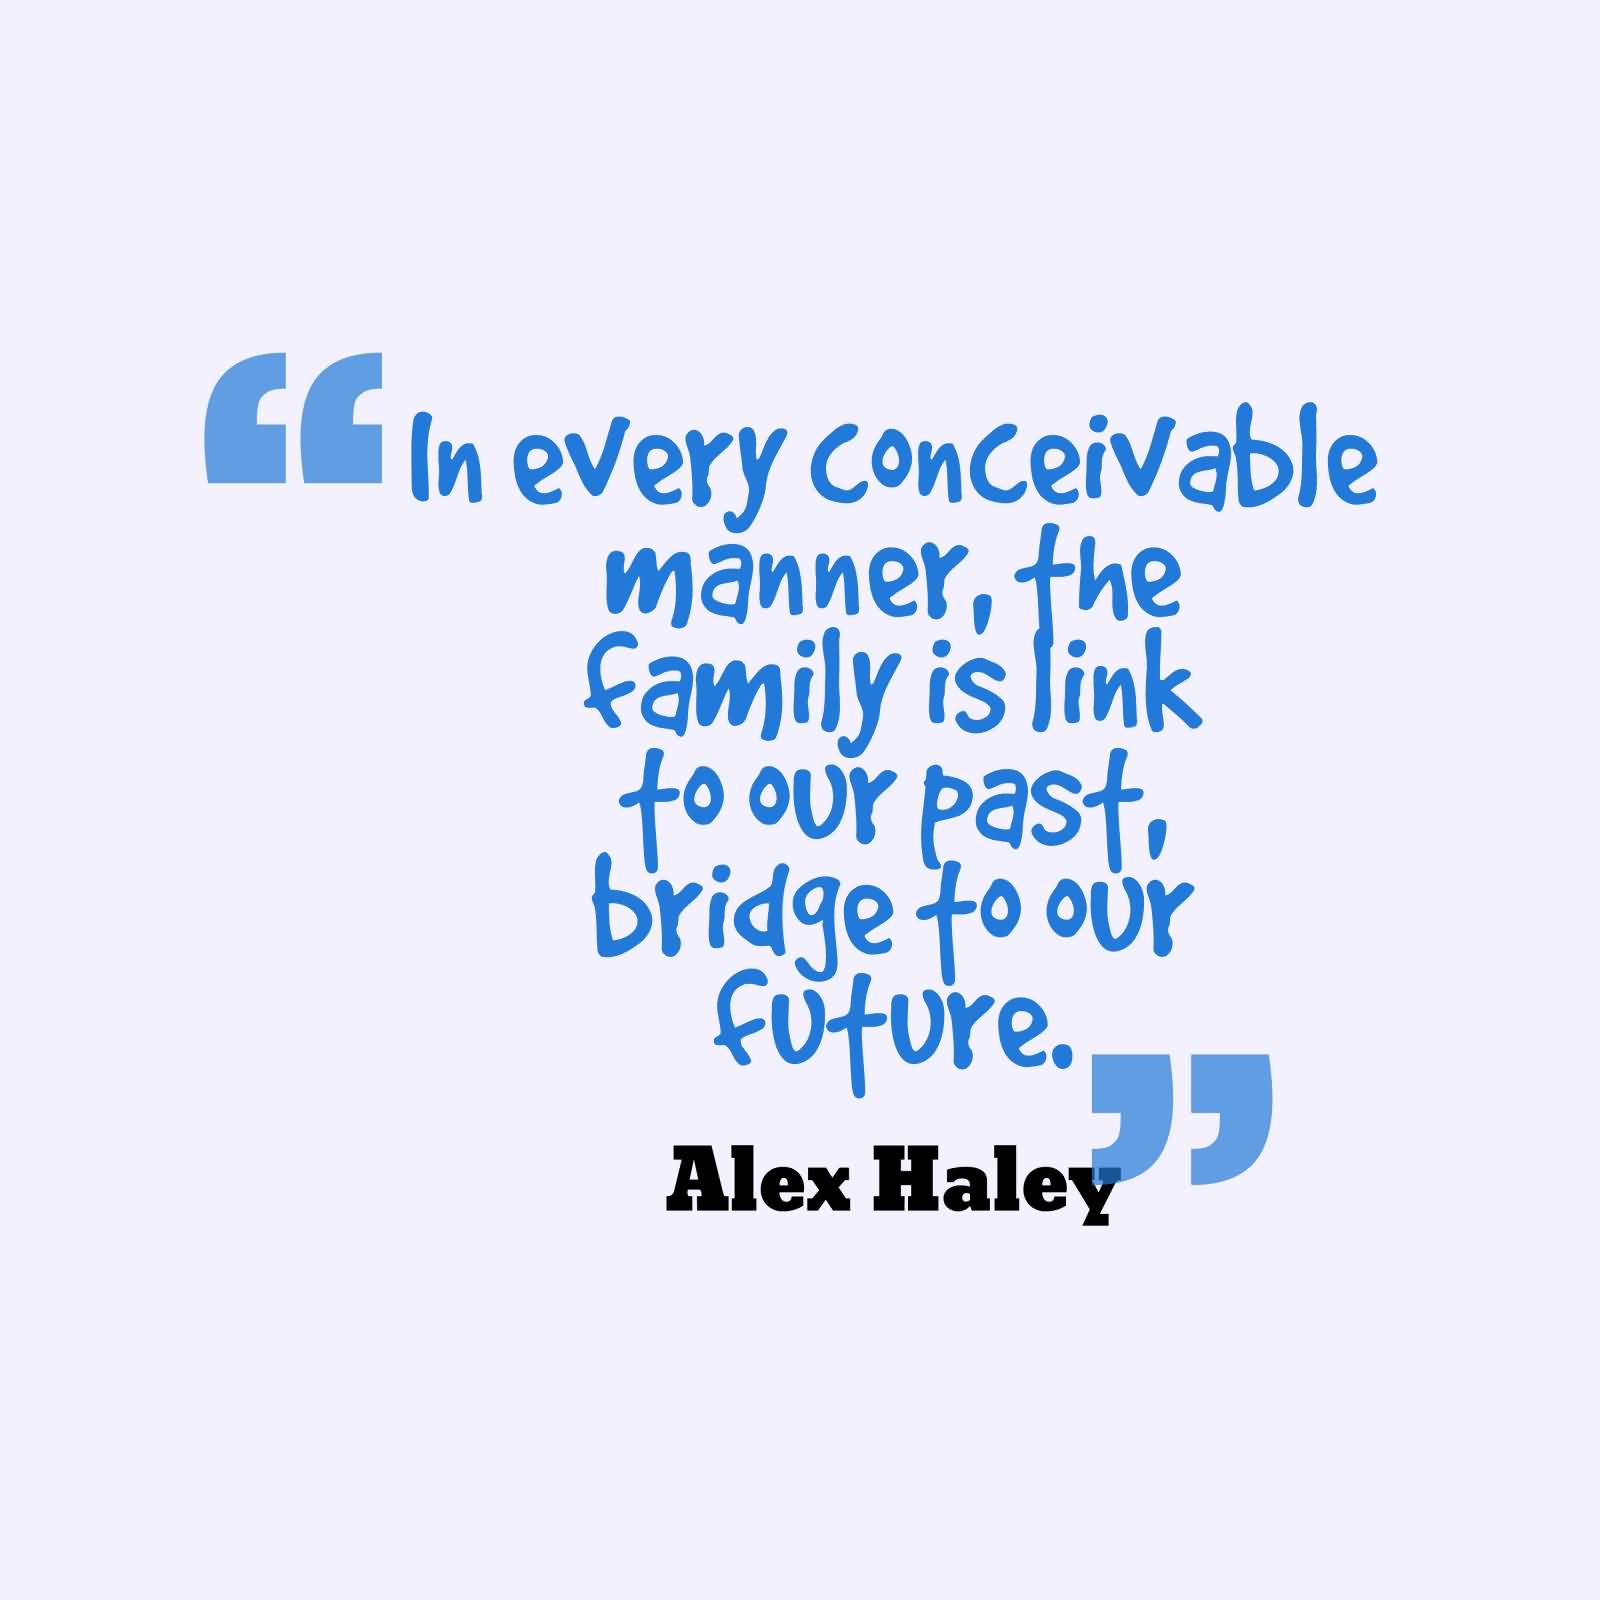 In every conceivable manner, the family is link to our past bridge toour future. Alex Haley